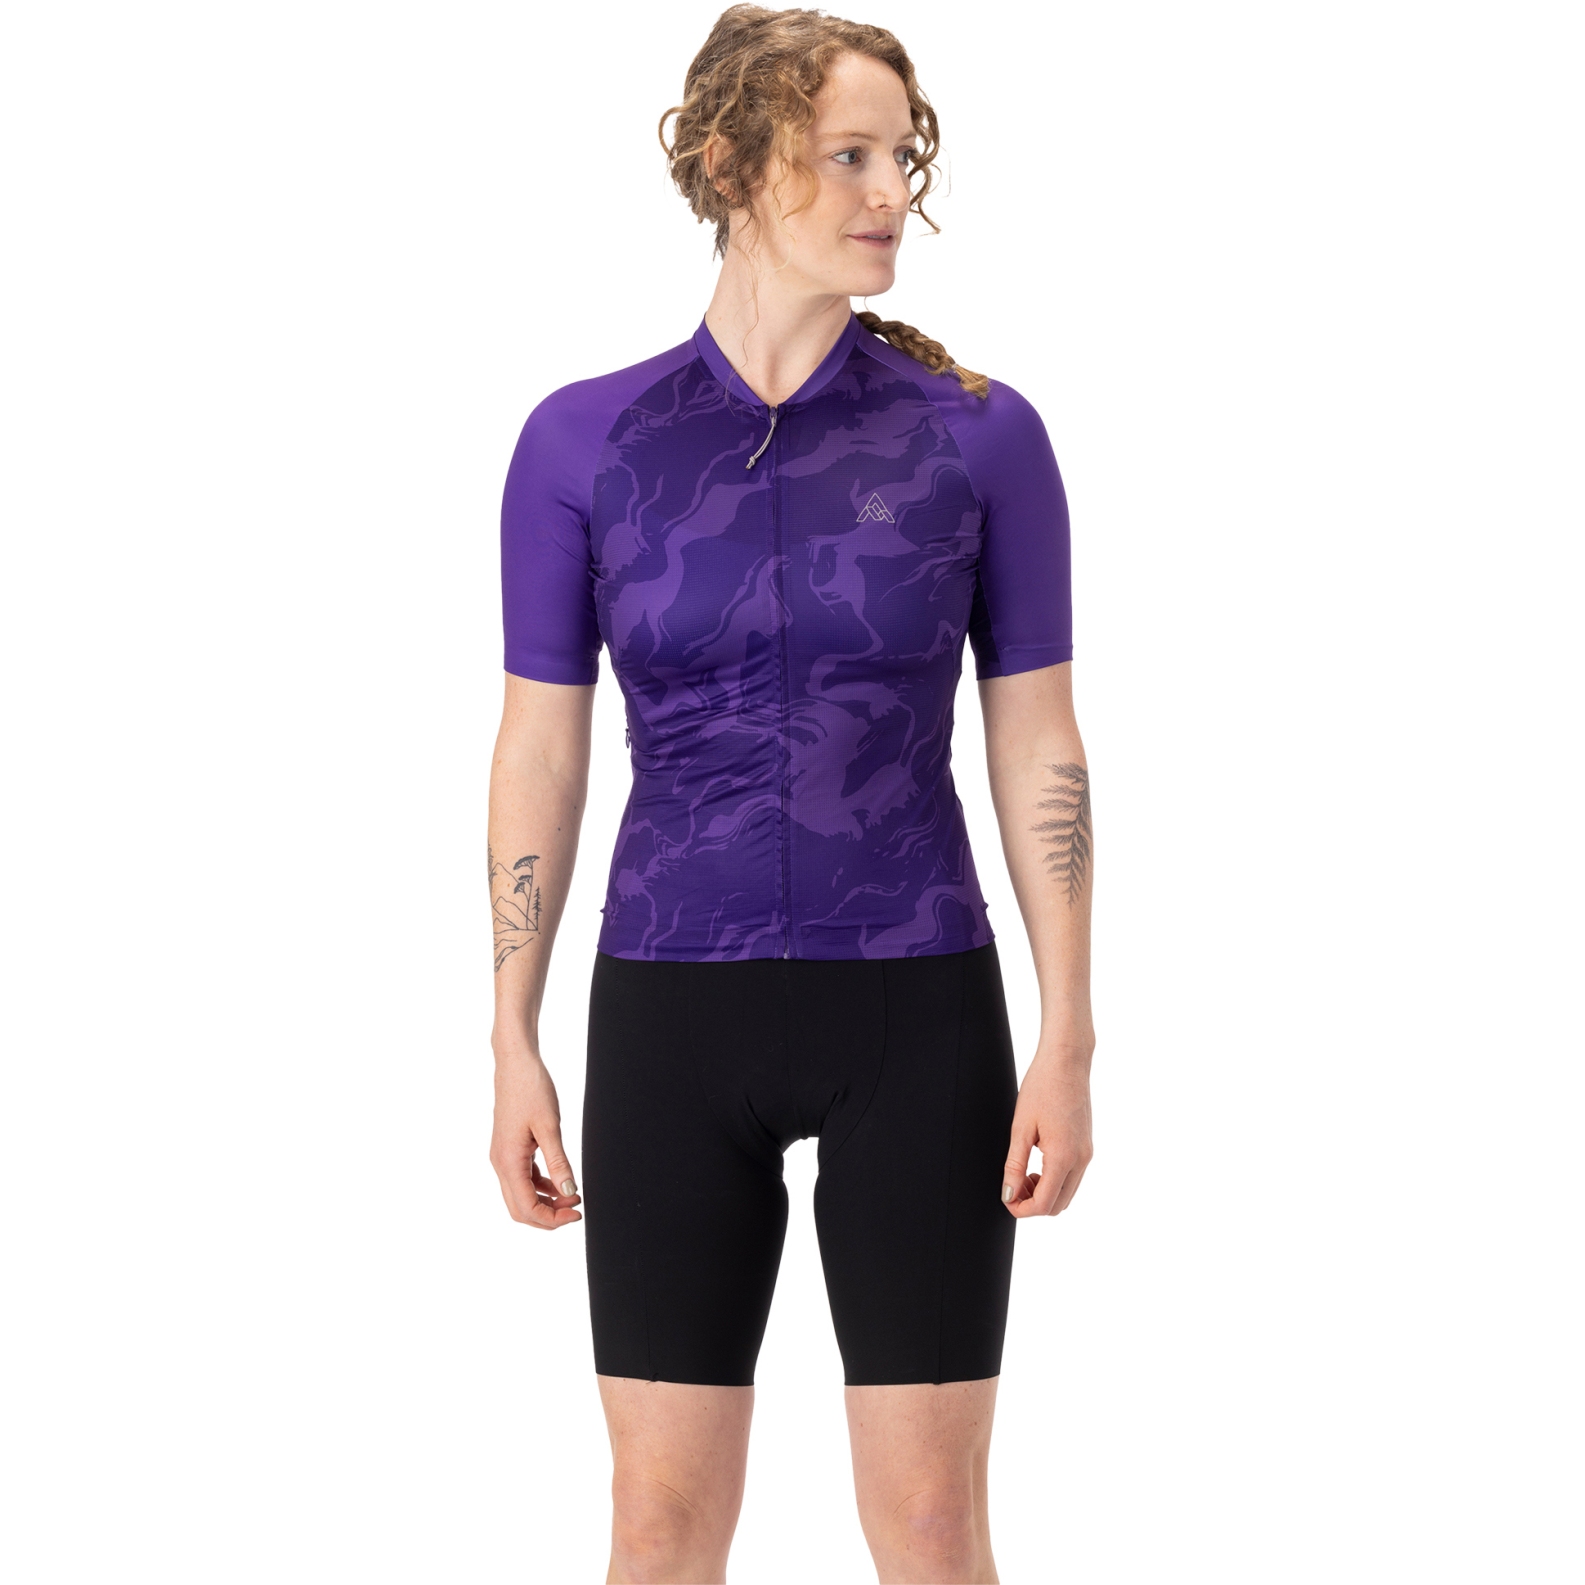 Picture of 7mesh Pace Short Sleeve Jersey Women - Purple Moon